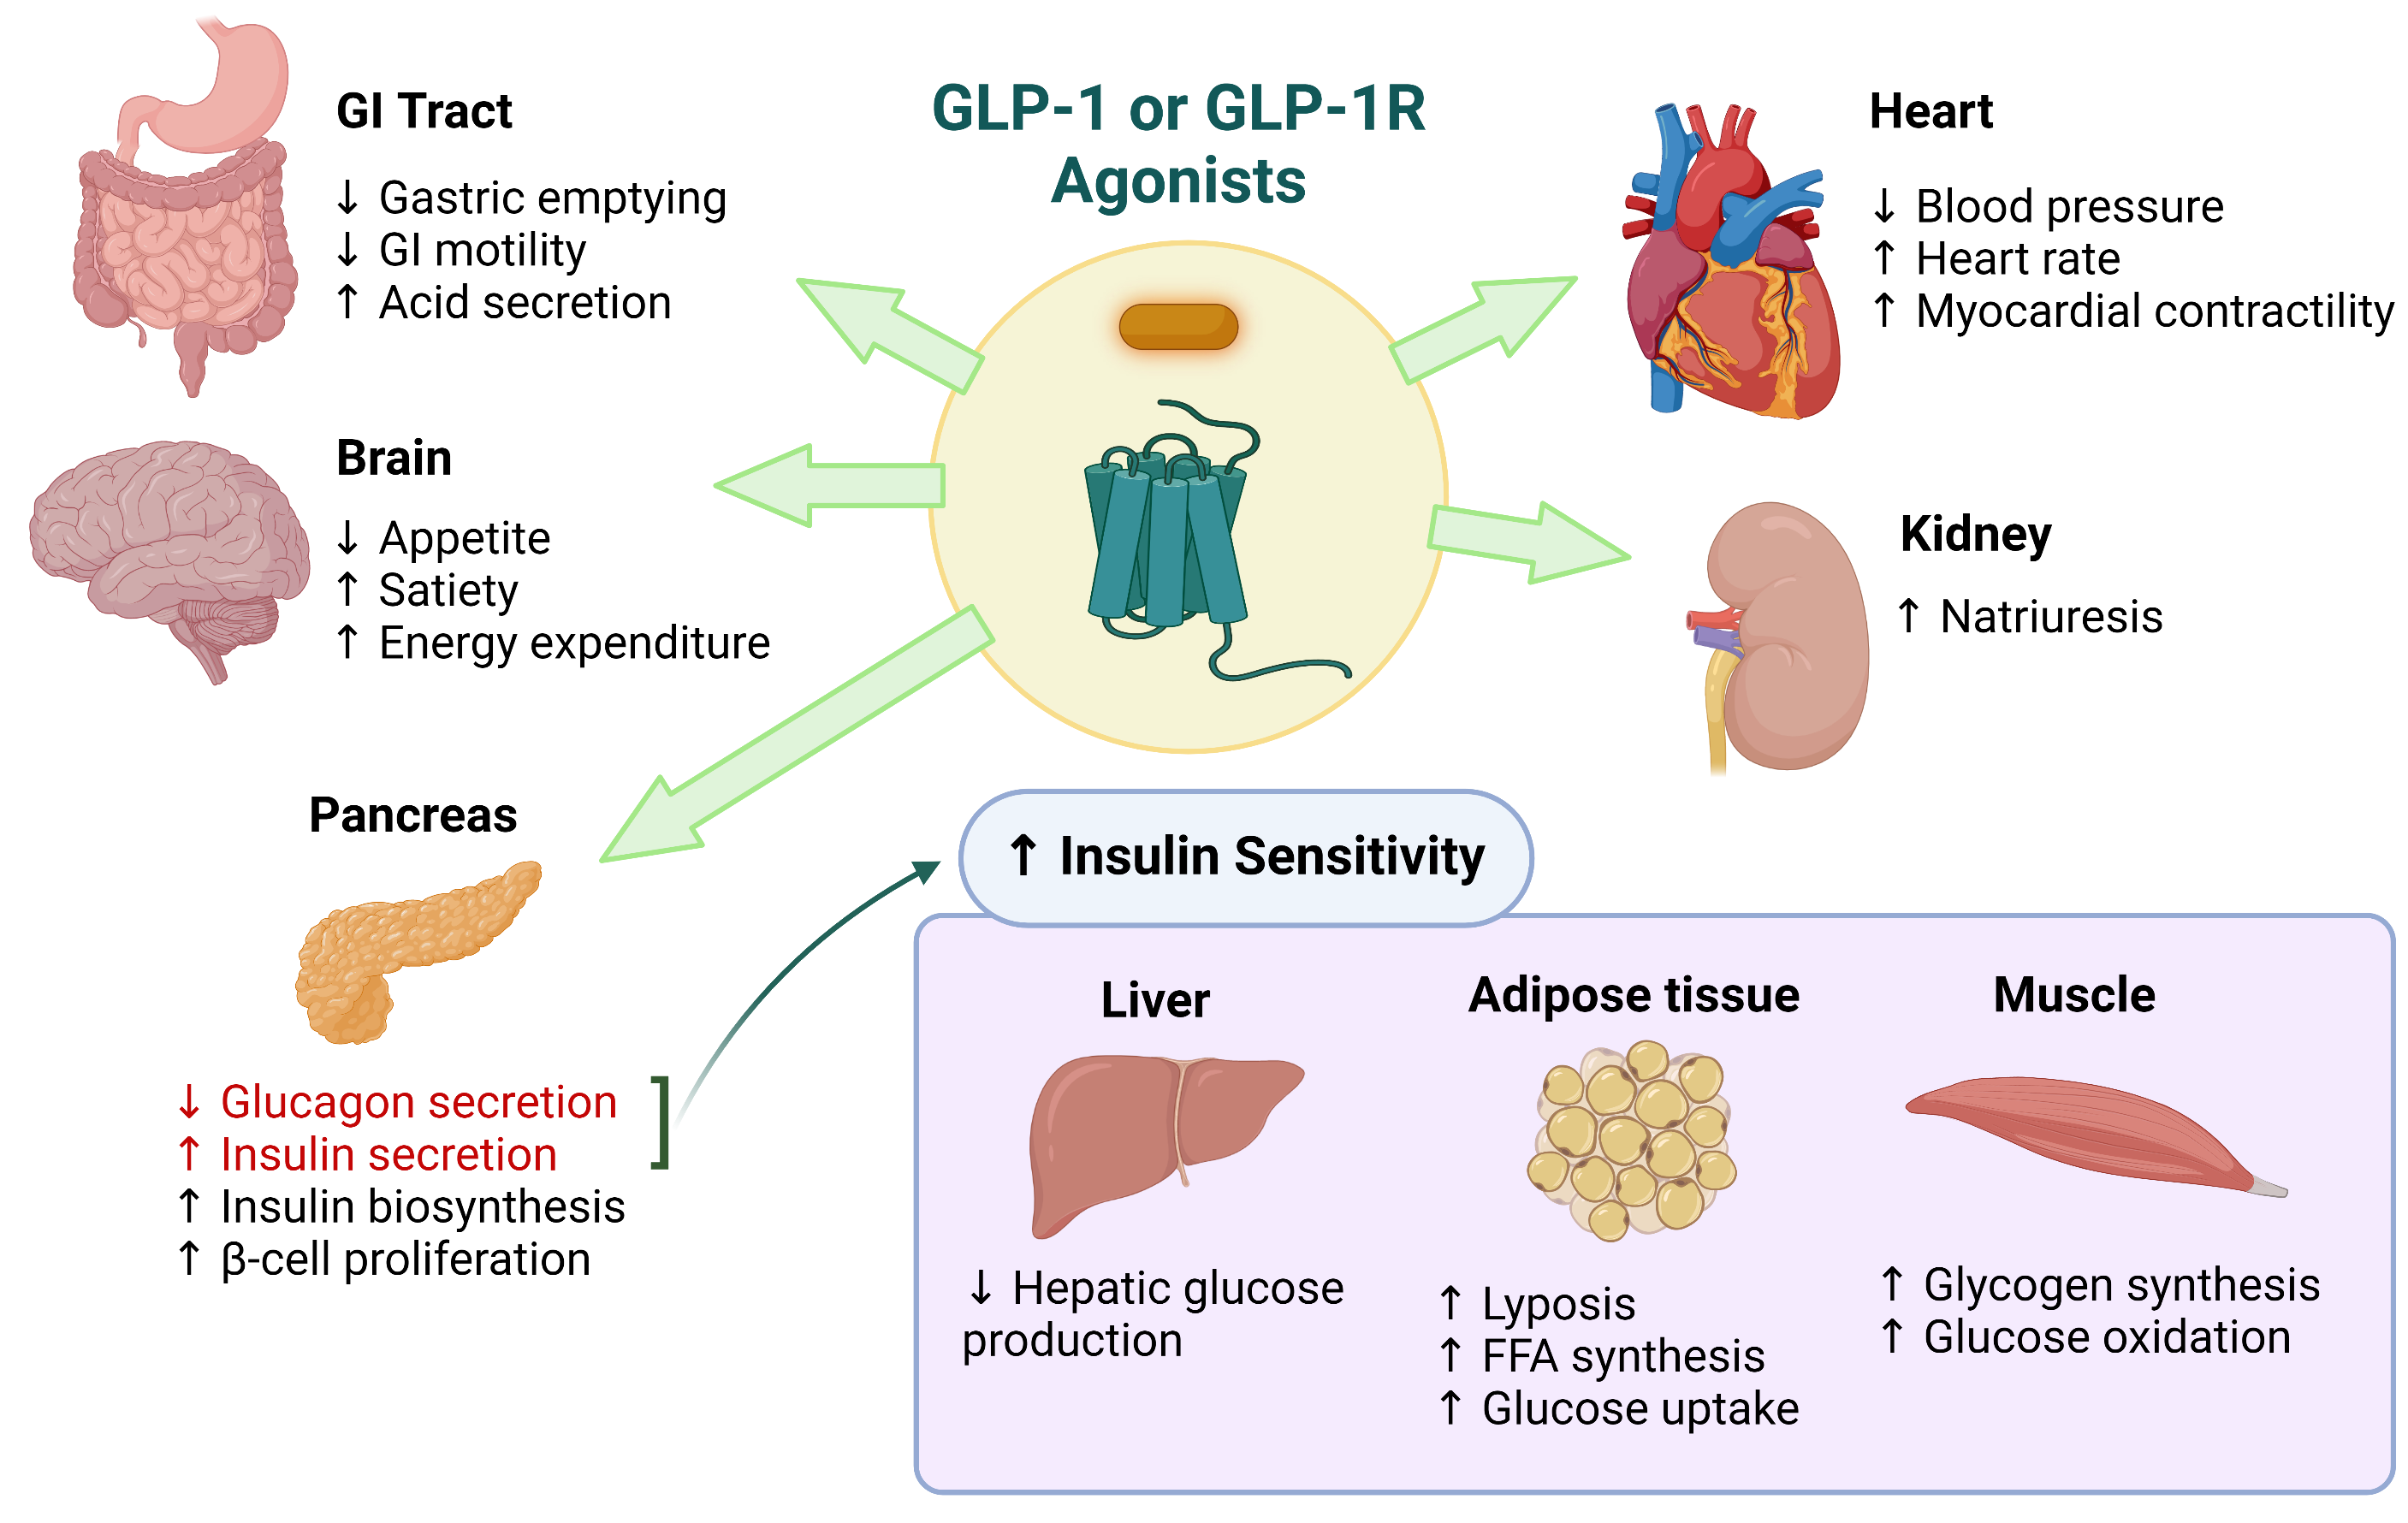 GLP-1 and GLP-1R Agonists